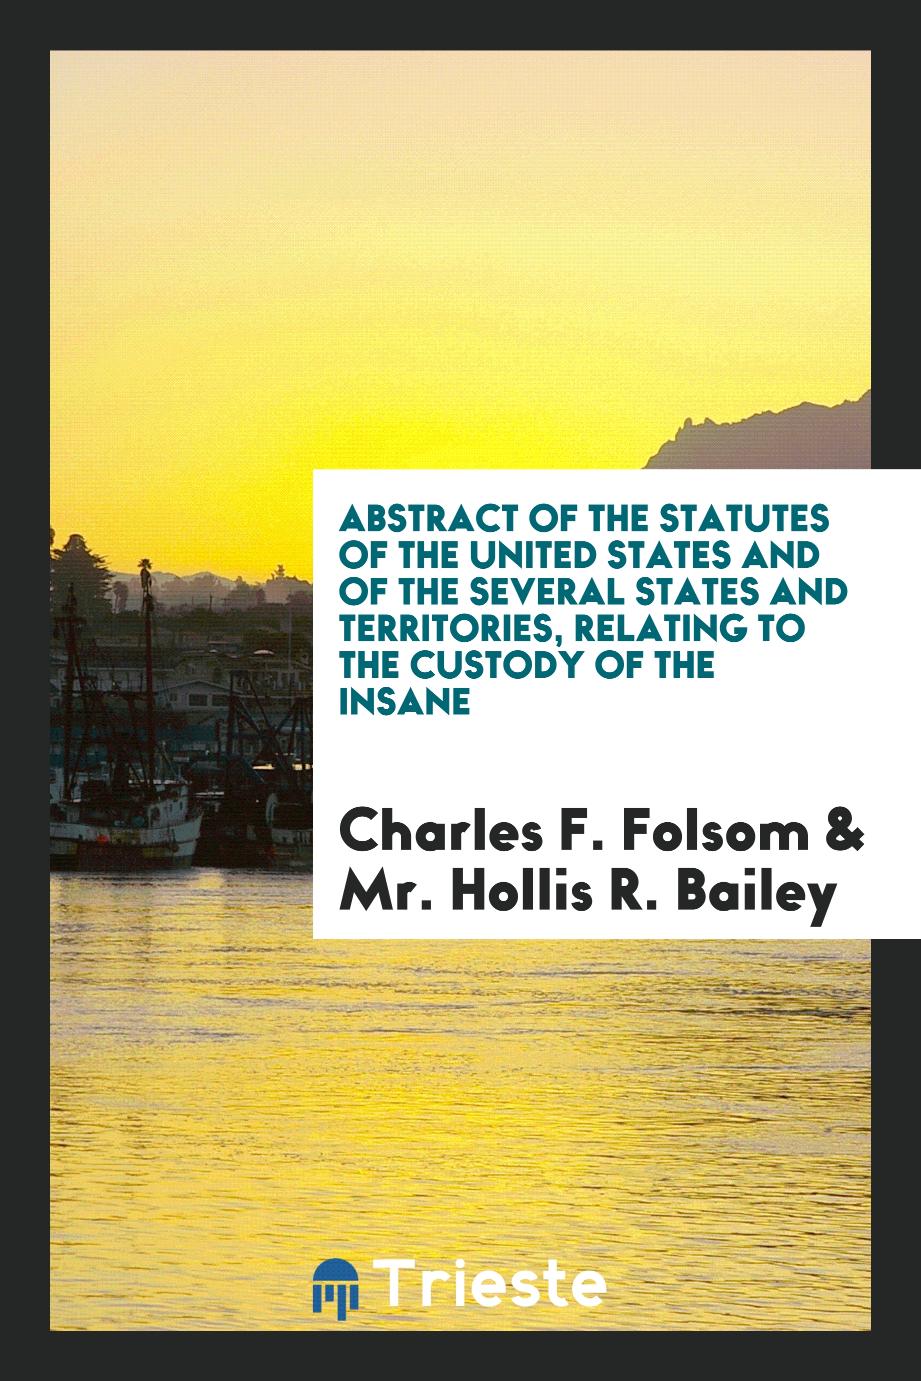 Abstract of the Statutes of the United States and of the Several States and Territories, Relating to the Custody of the Insane